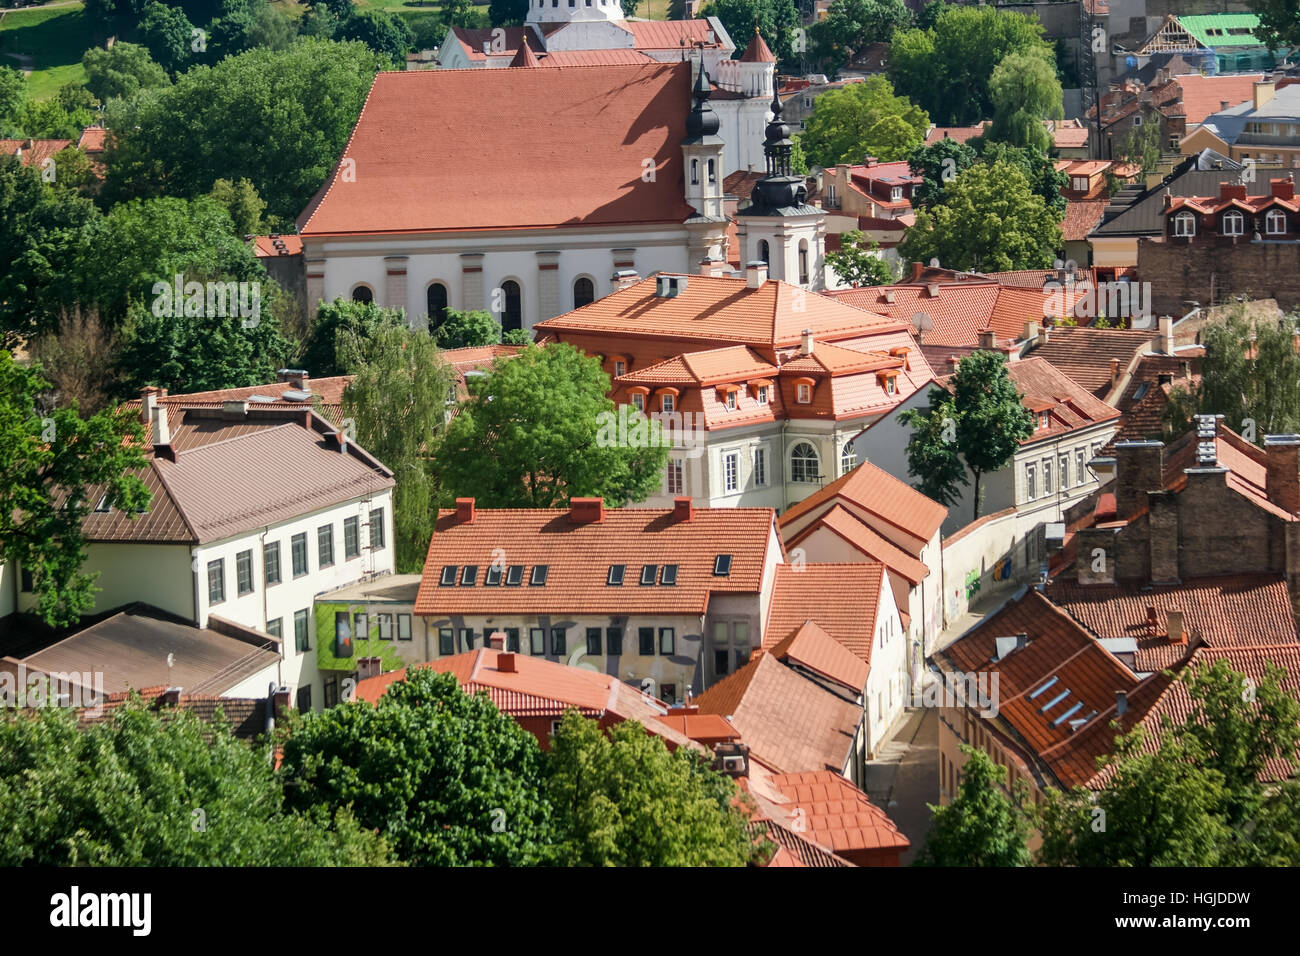 Town buildings and trees. Stock Photo